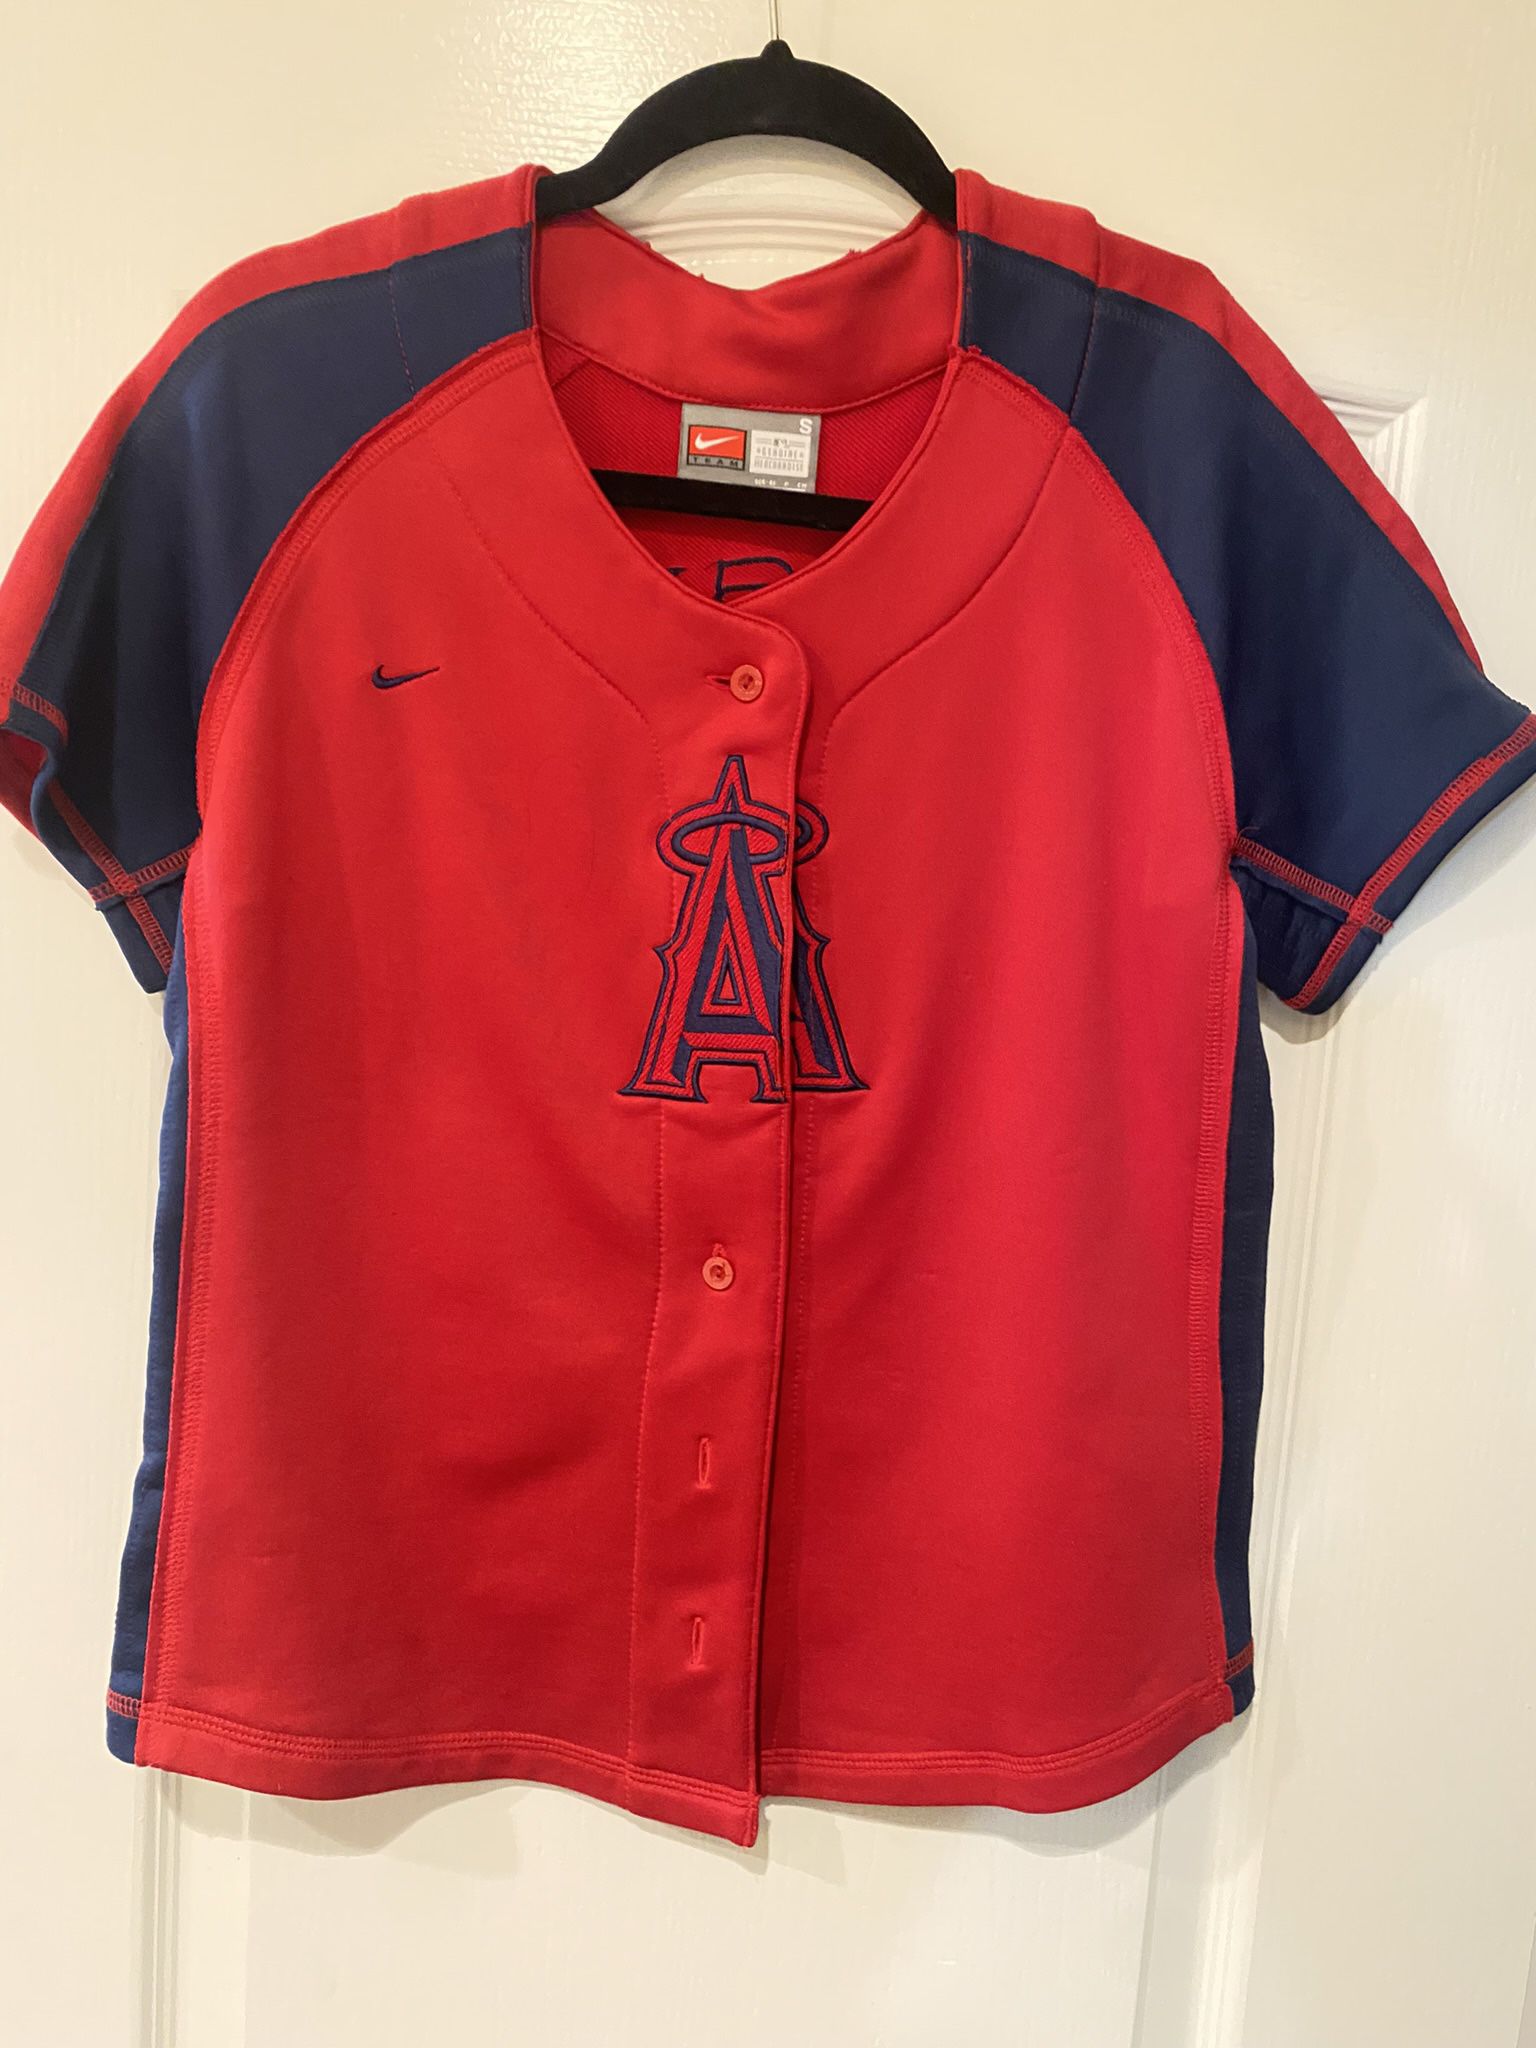 Women's Angel's Baseball Jersey for Sale in Trabuco Canyon, CA - OfferUp